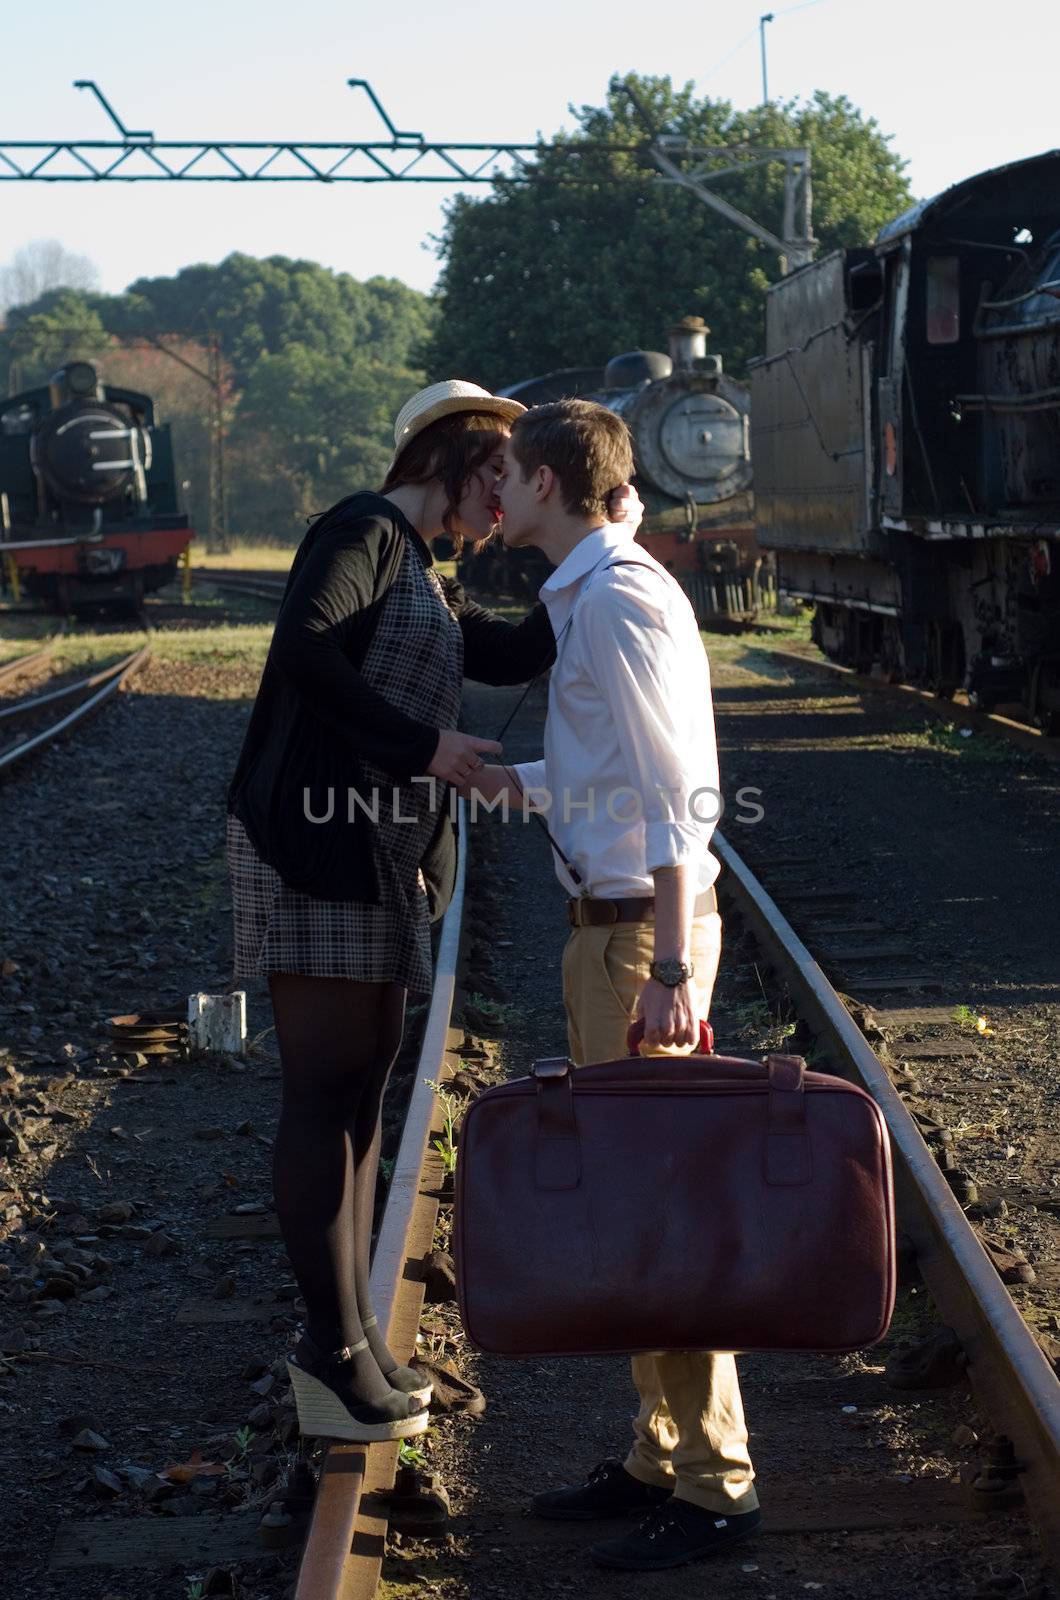 Retro hip hipster romantic love couple in vintage train setting